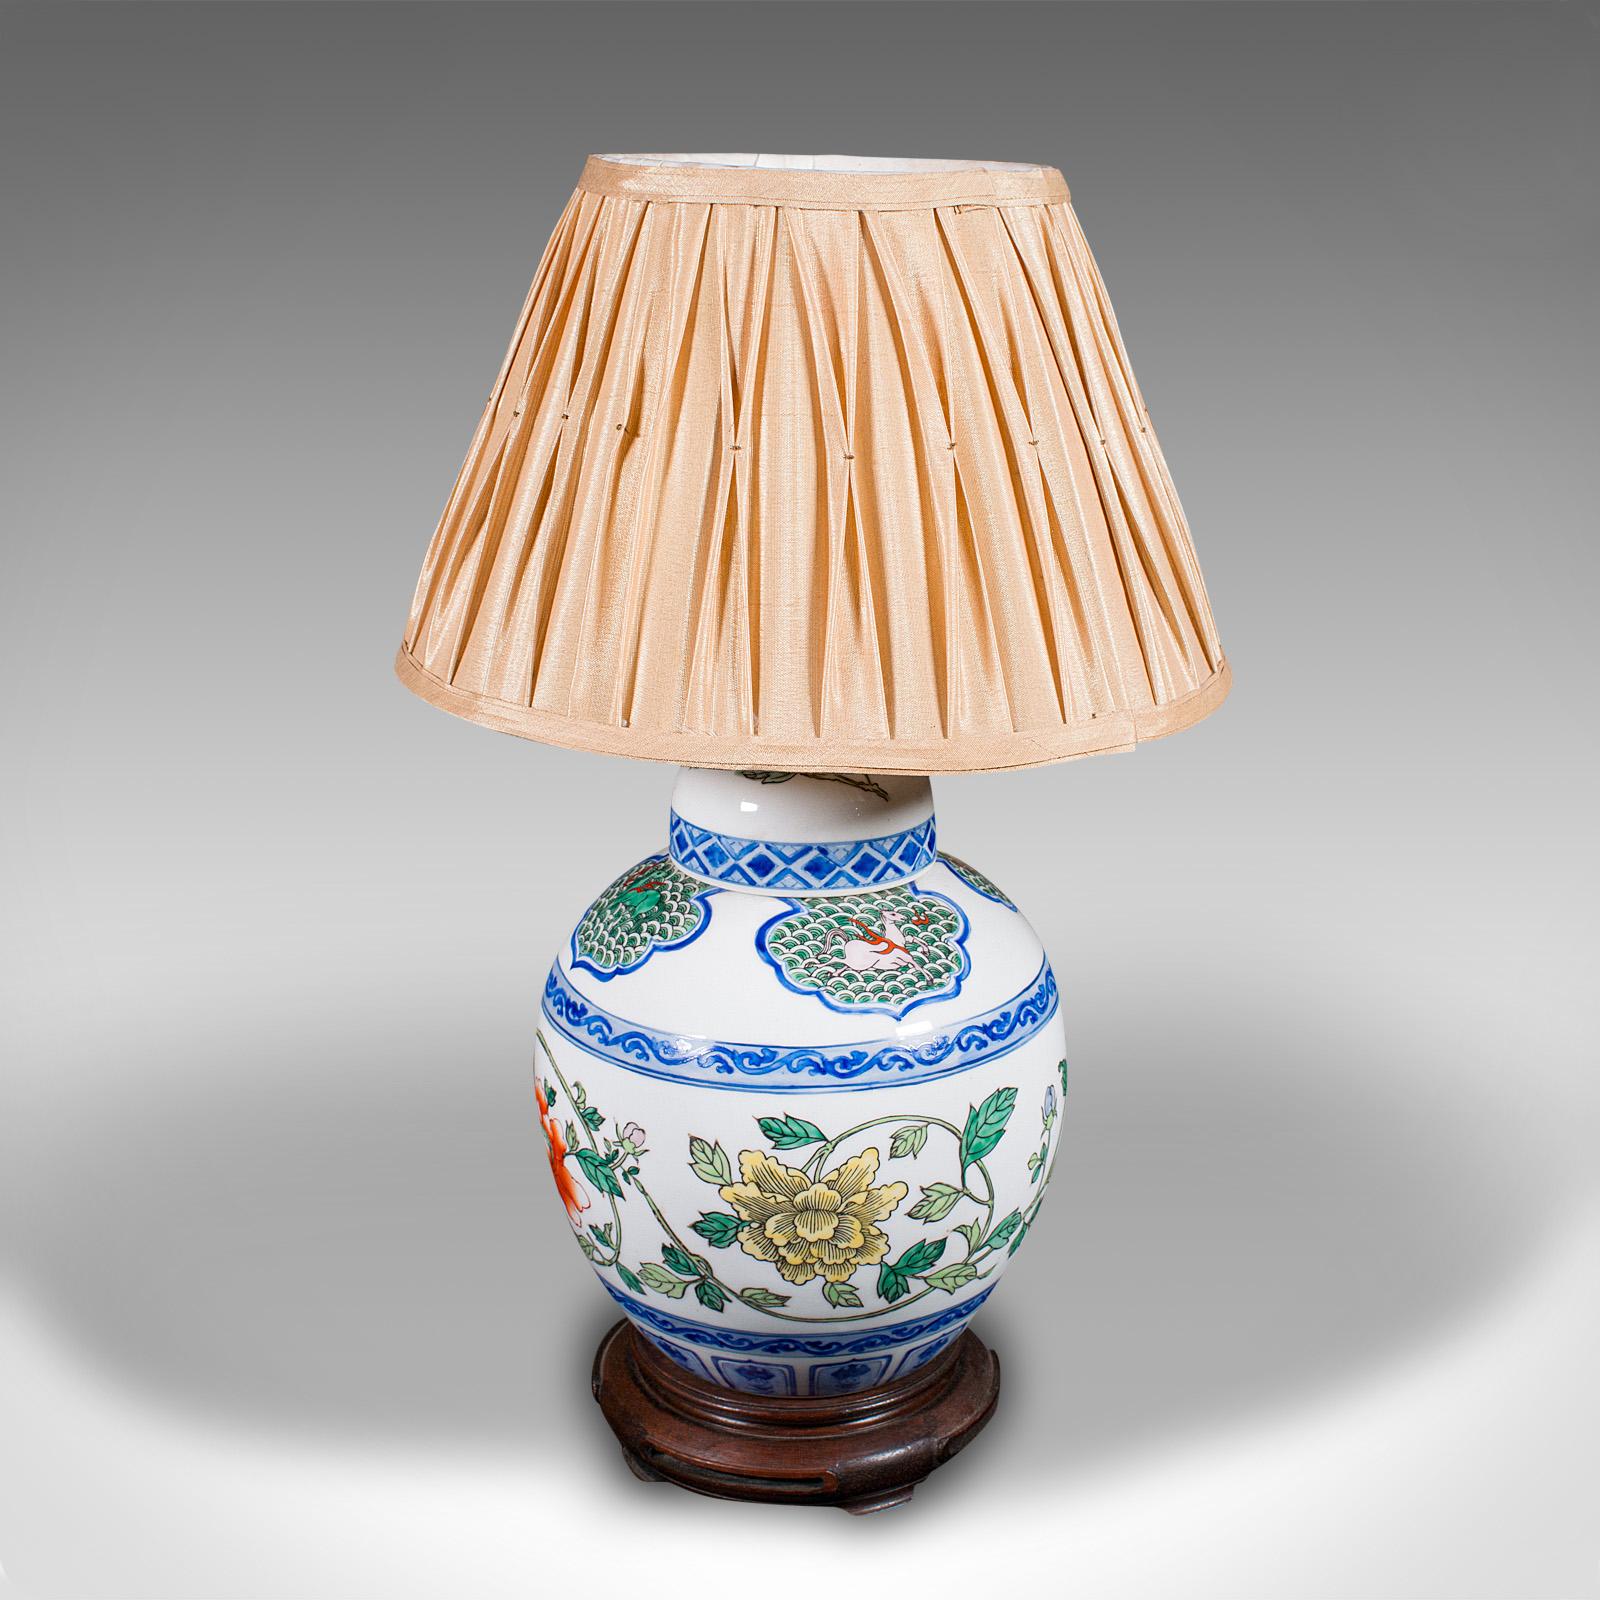 Vintage Art Deco Table Lamp, Chinese, Ceramic, Accent Light, Mid 20th Century For Sale 2